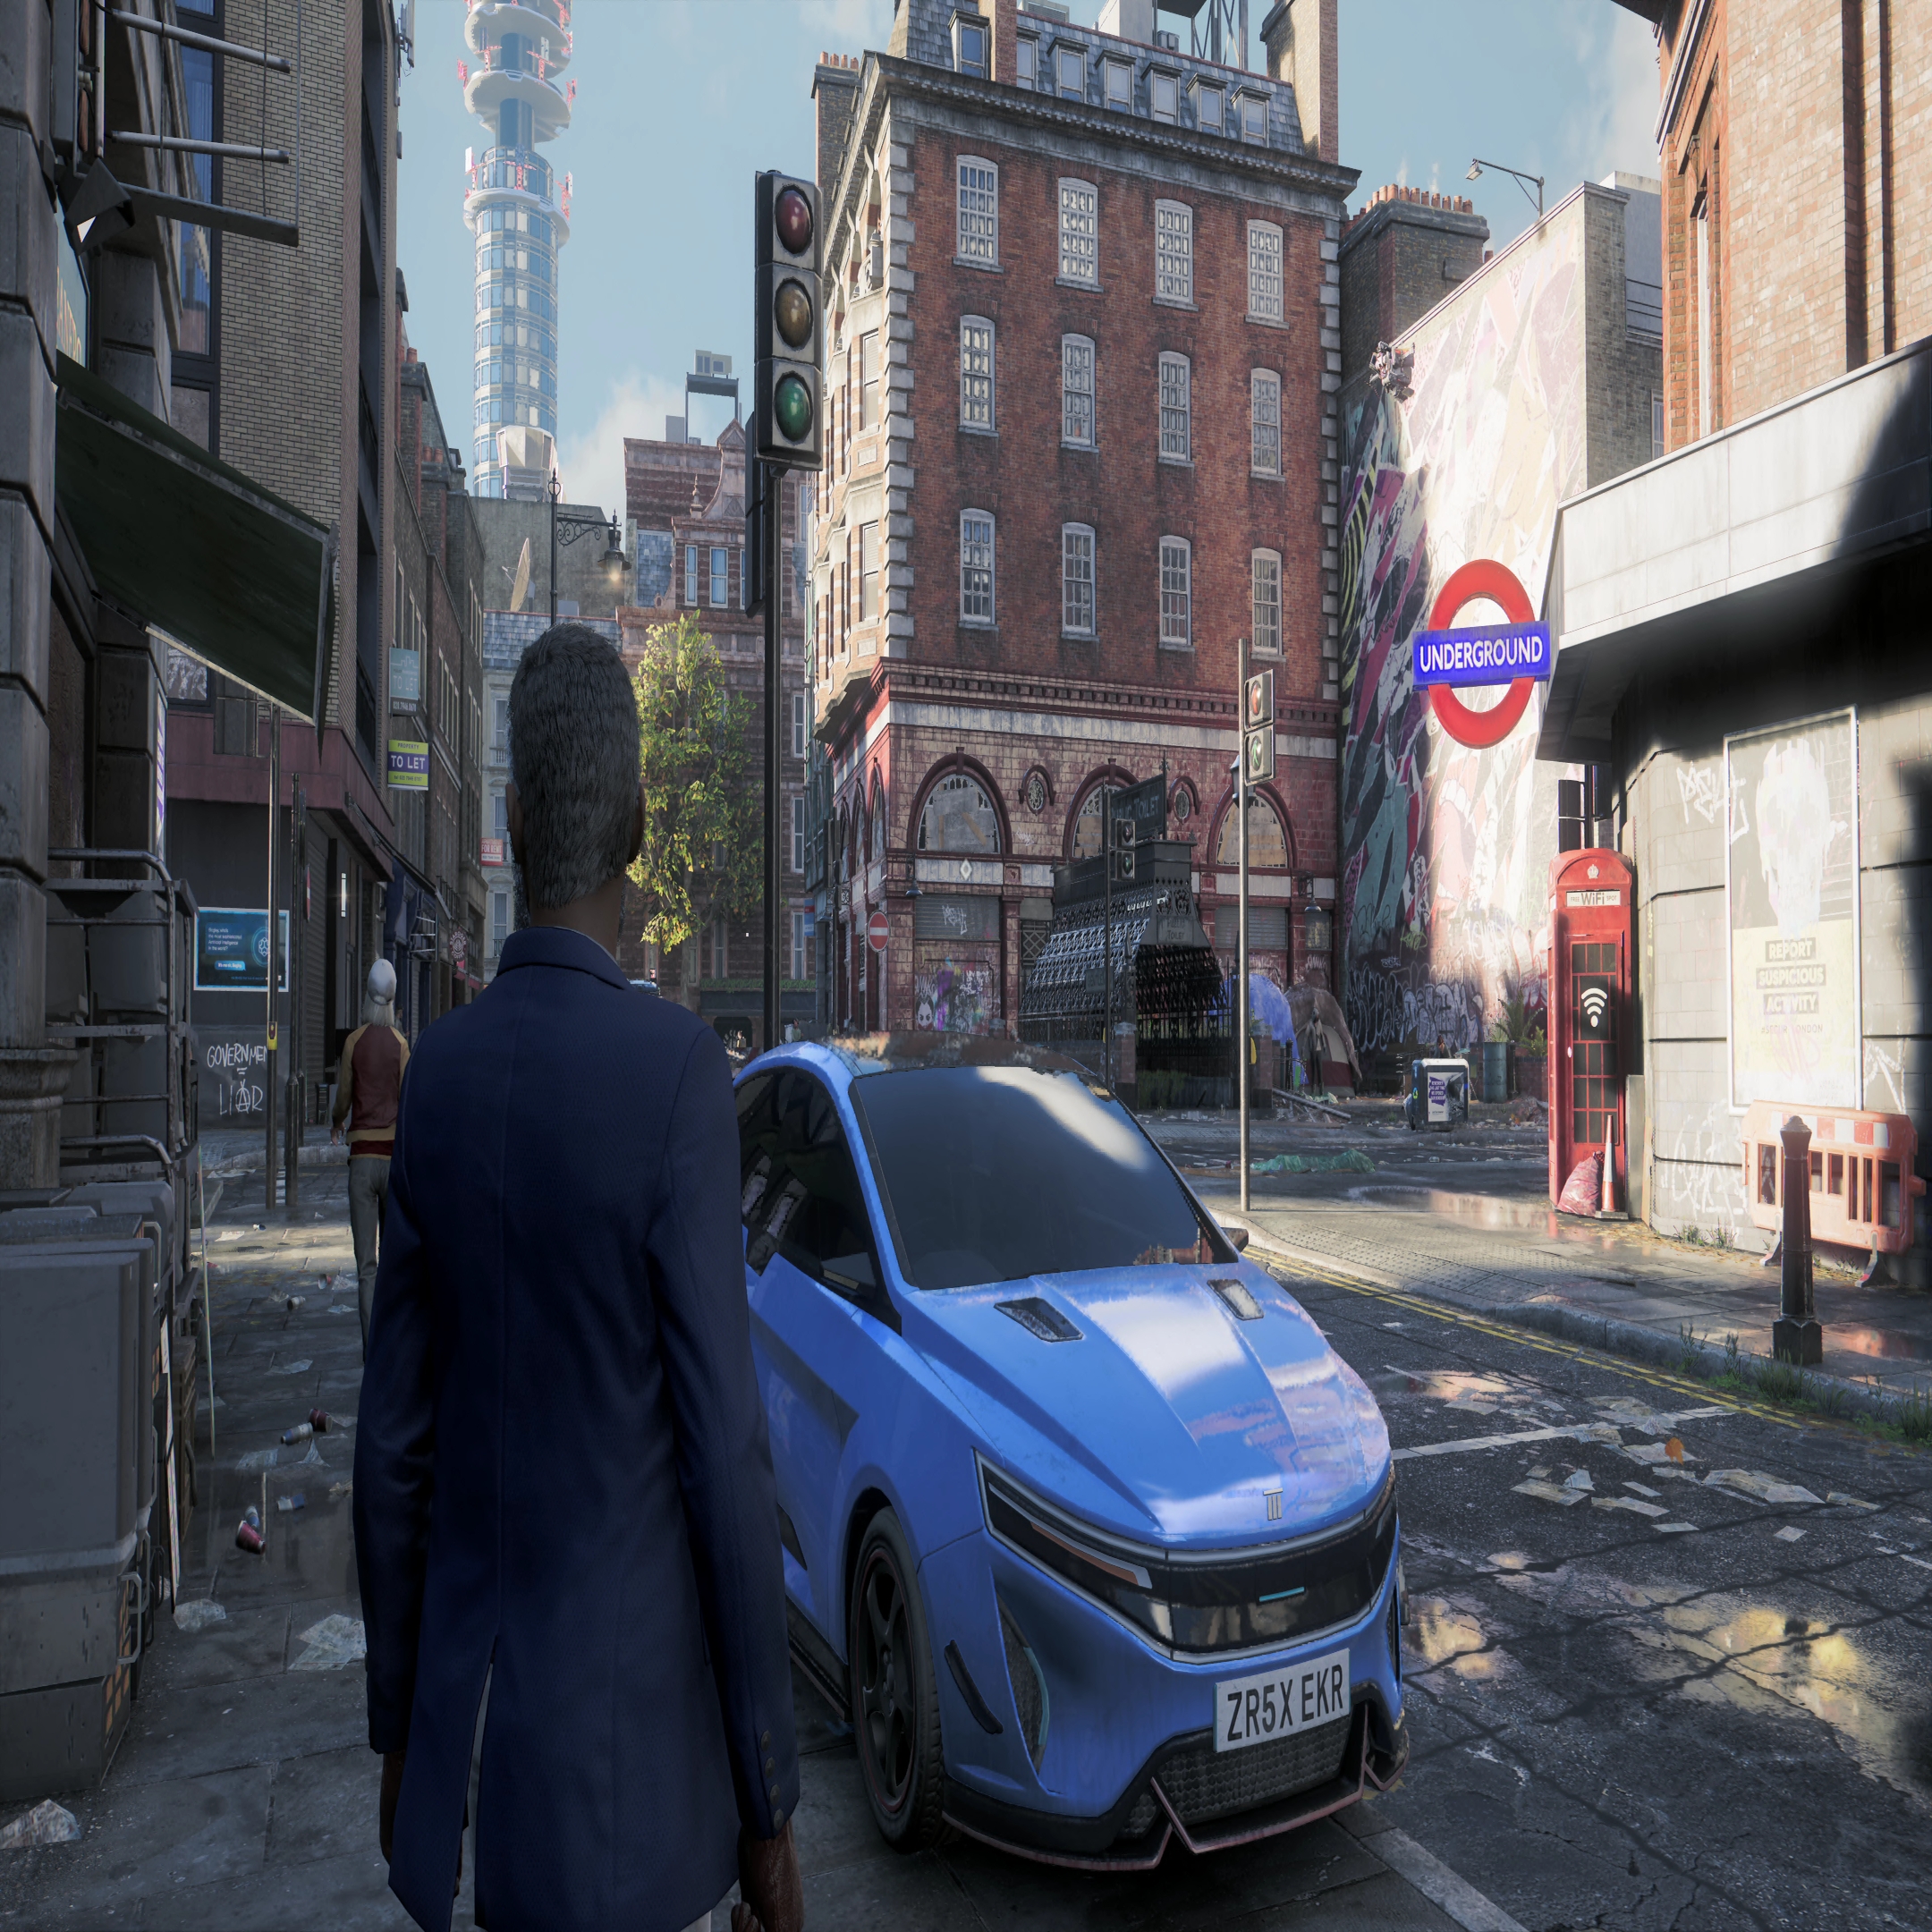 Watch Dogs Legion on Xbox Series S runs in dynamic 1080, ray-tracing on PC  has slight advantage over consoles